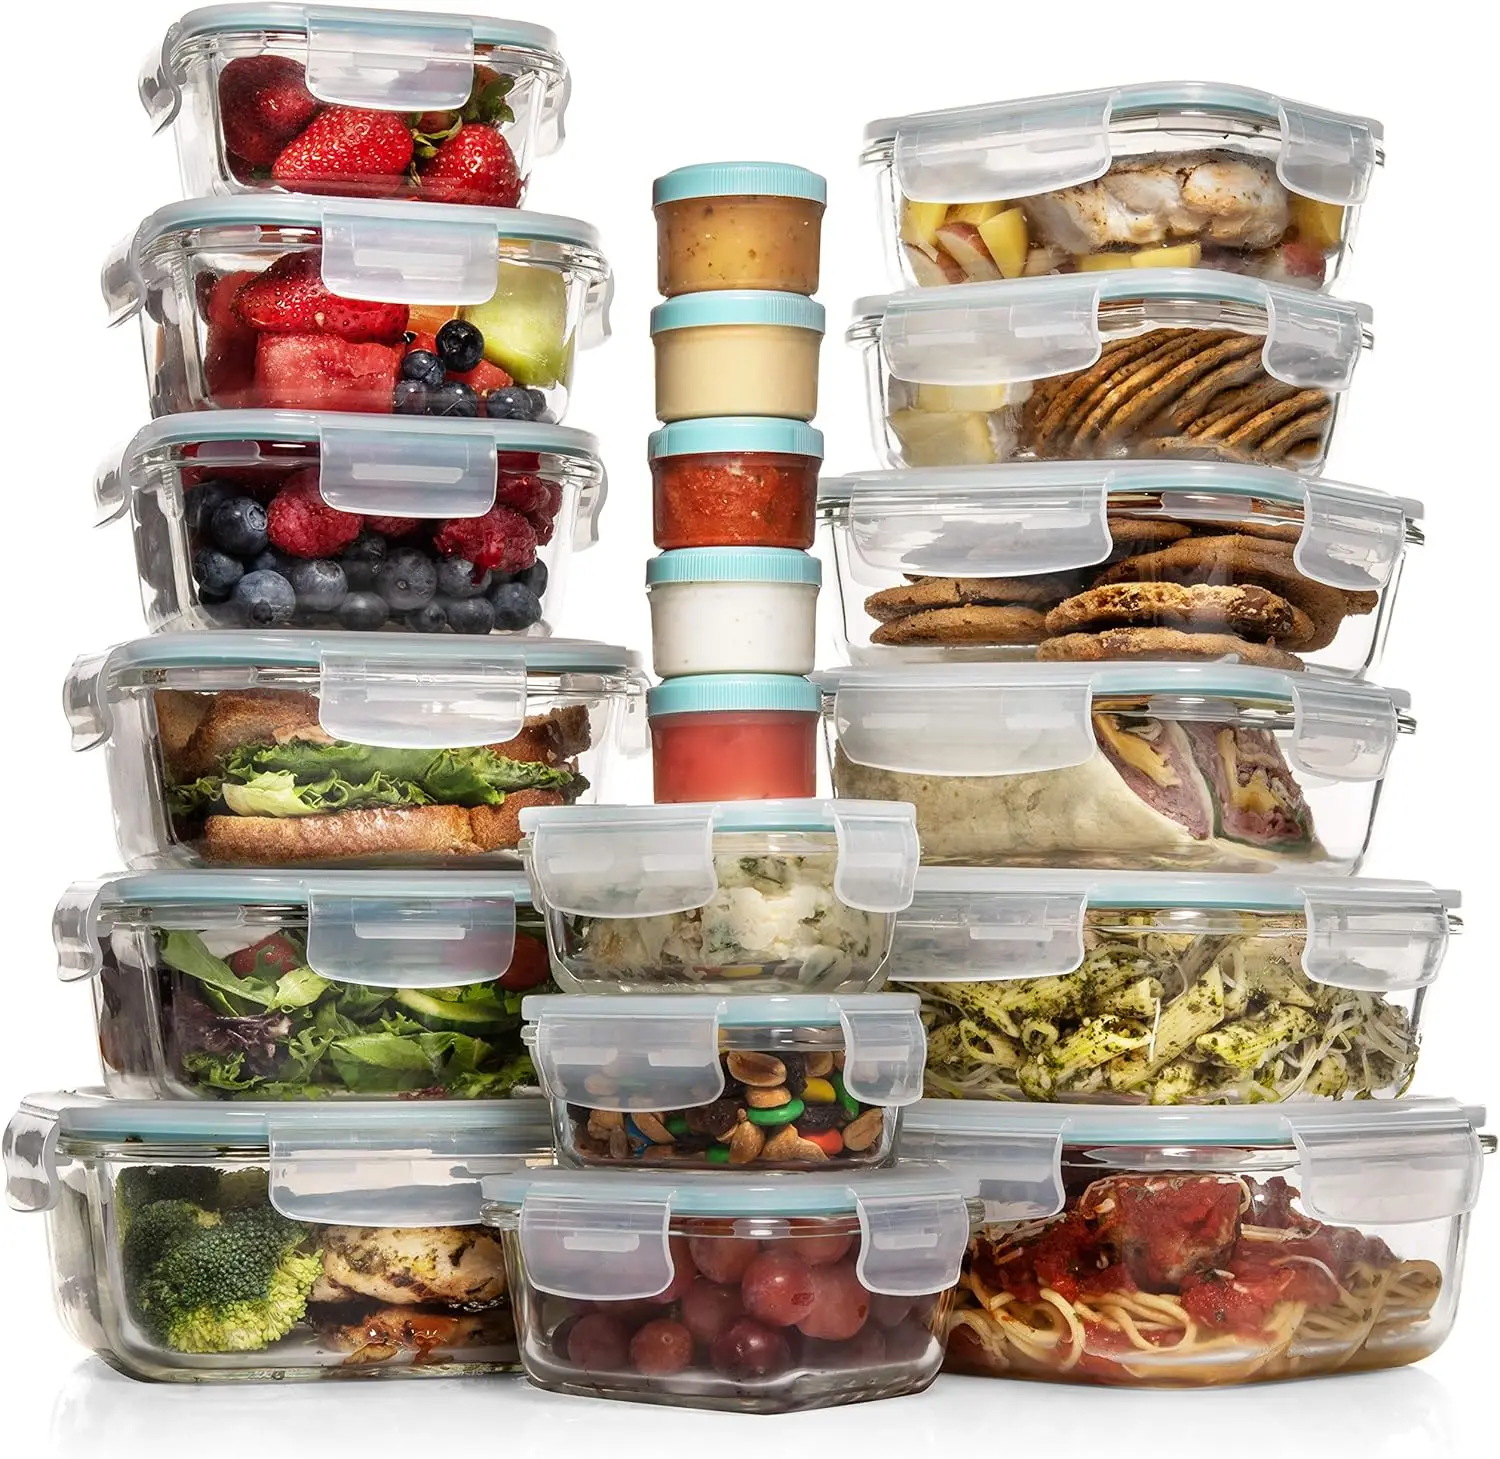 https://ae01.alicdn.com/kf/S6becb273f77442938d3ea7536c3515dbW/35-Pc-Set-Glass-Food-Storage-Containers-with-Lids-Meal-Prep-Airtight-Glass-Bento-Boxes-BPA.jpg